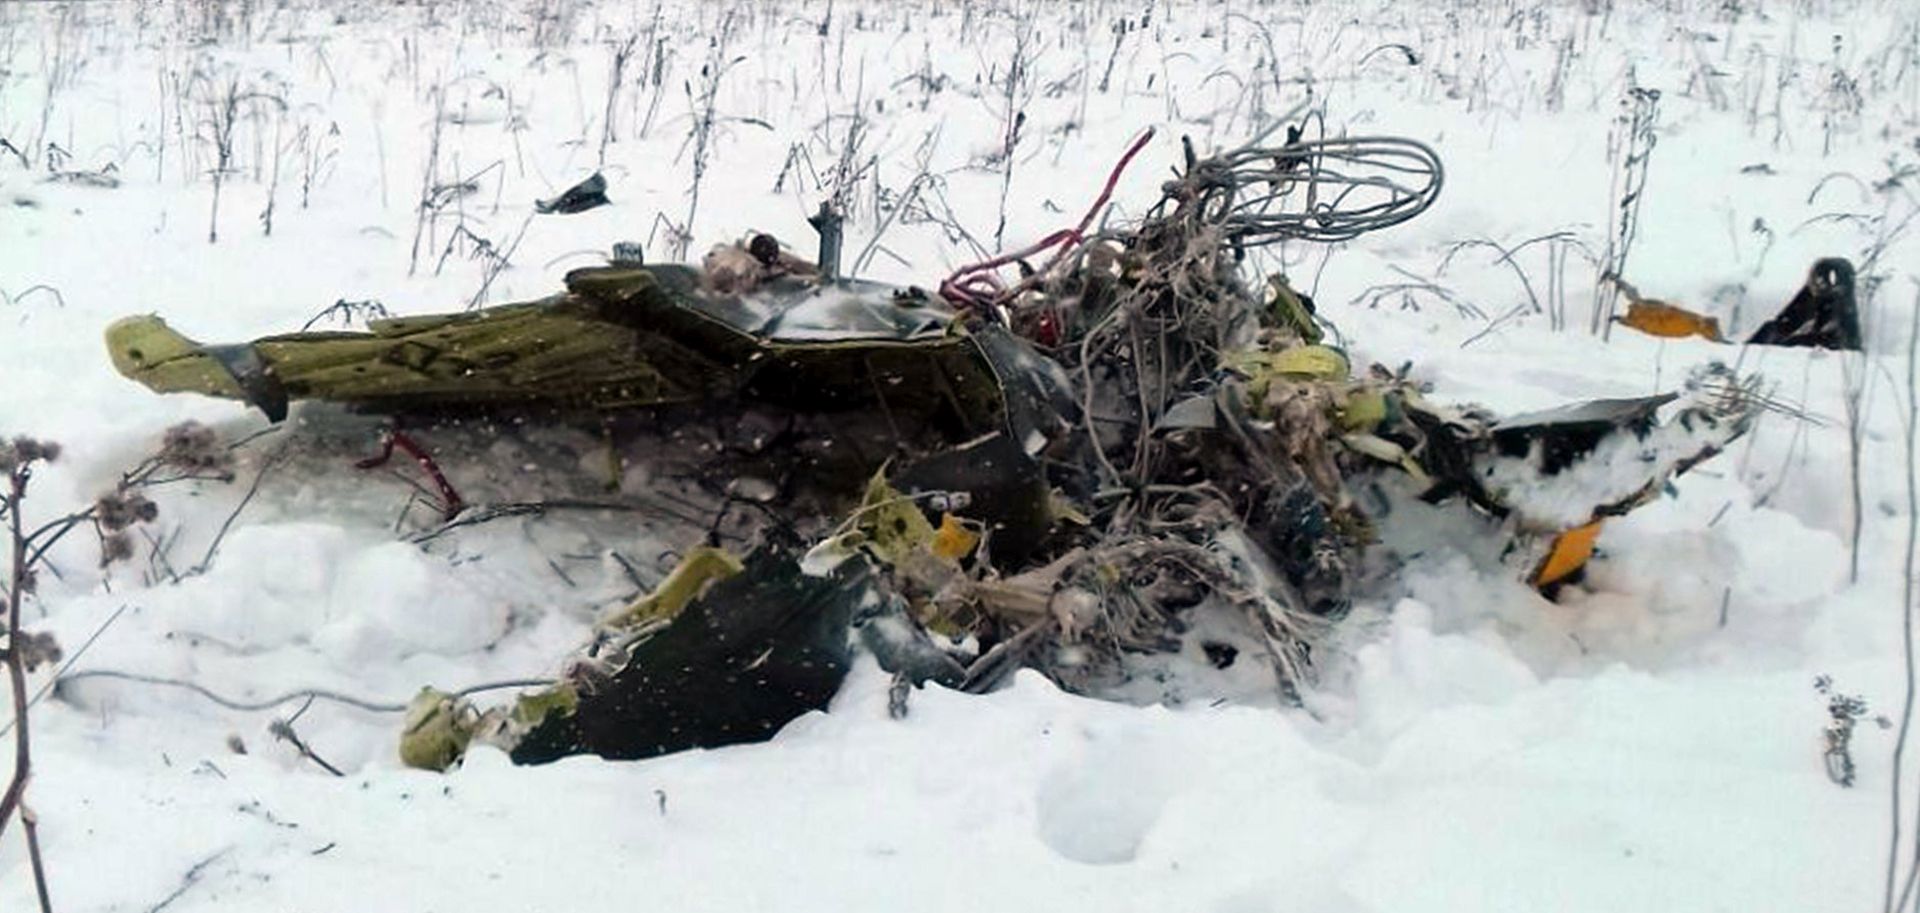 epa06517168 A picture made available on 12 February 2018 shows a debris of the crashed Russian Saratov Airlines Antonov AN-148 passenger plane lies in the snow near the Stepanovskoy village near Argunovo, Ramensky district, Moscow region, Russia, 11 February 2018. A Russian Antonov AN-148 crashed shortly after take off from Domodedovo airport outside Moscow. All 71 people aboard are believed to have died in the crash. The plane of Saratov airlines was en route from Moscow to Orsk, Orenburg region.  EPA/ALEXANDER OLEINIKOV BEST QUALITY AVAILABLE